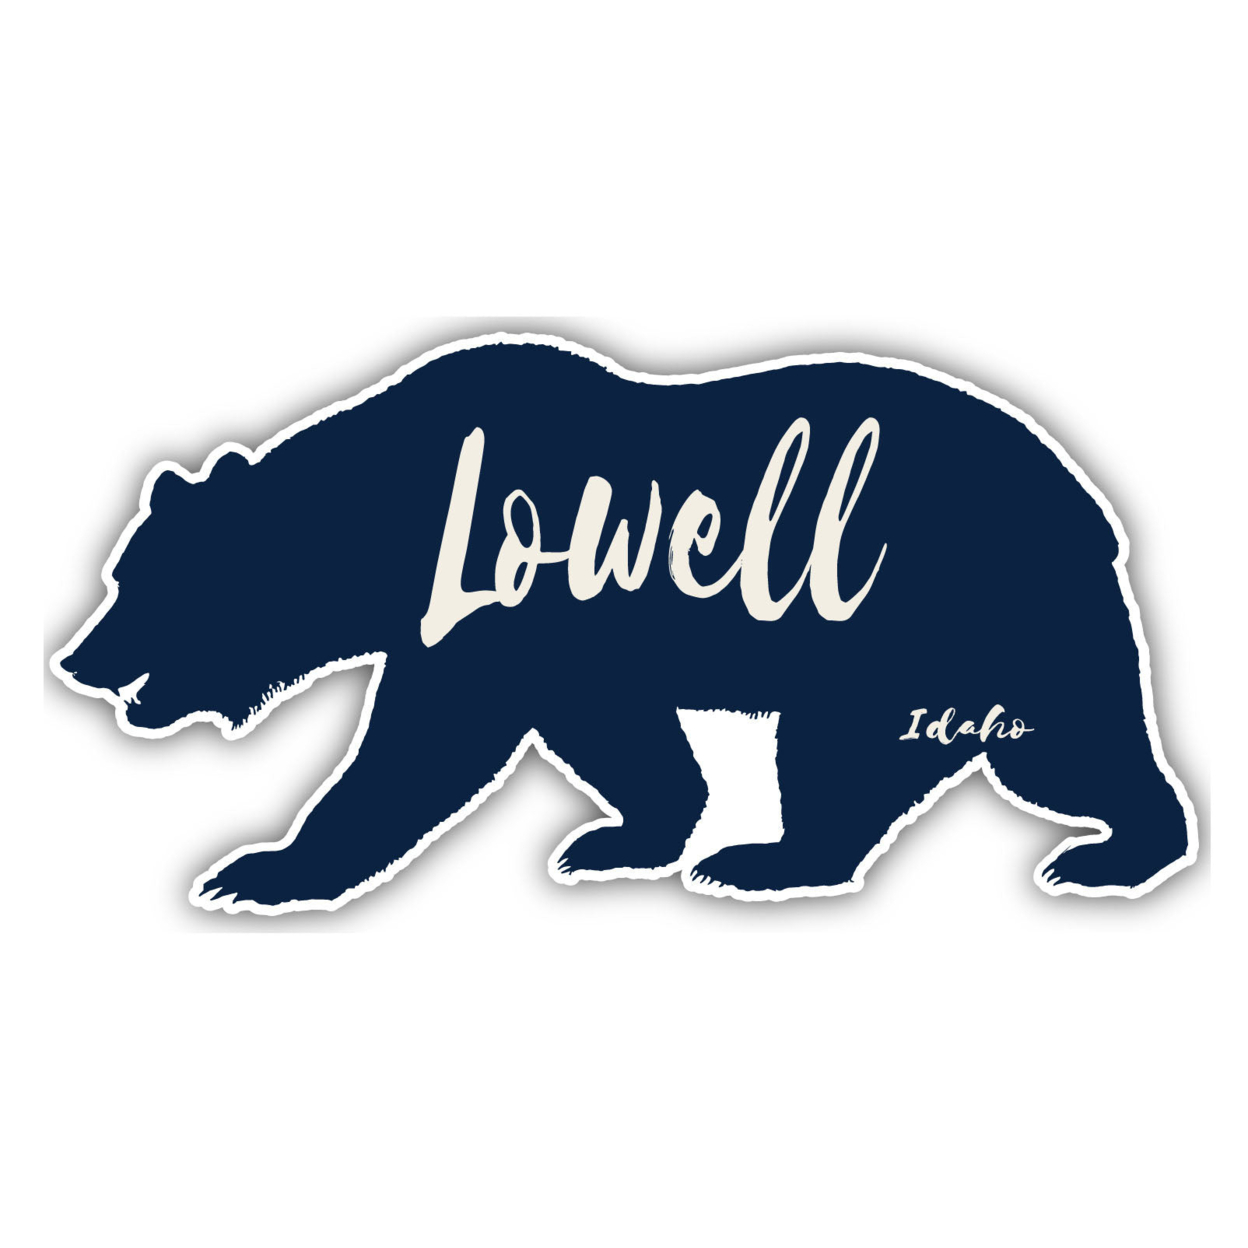 Lowell Idaho Souvenir Decorative Stickers (Choose Theme And Size) - 2-Inch, Bear